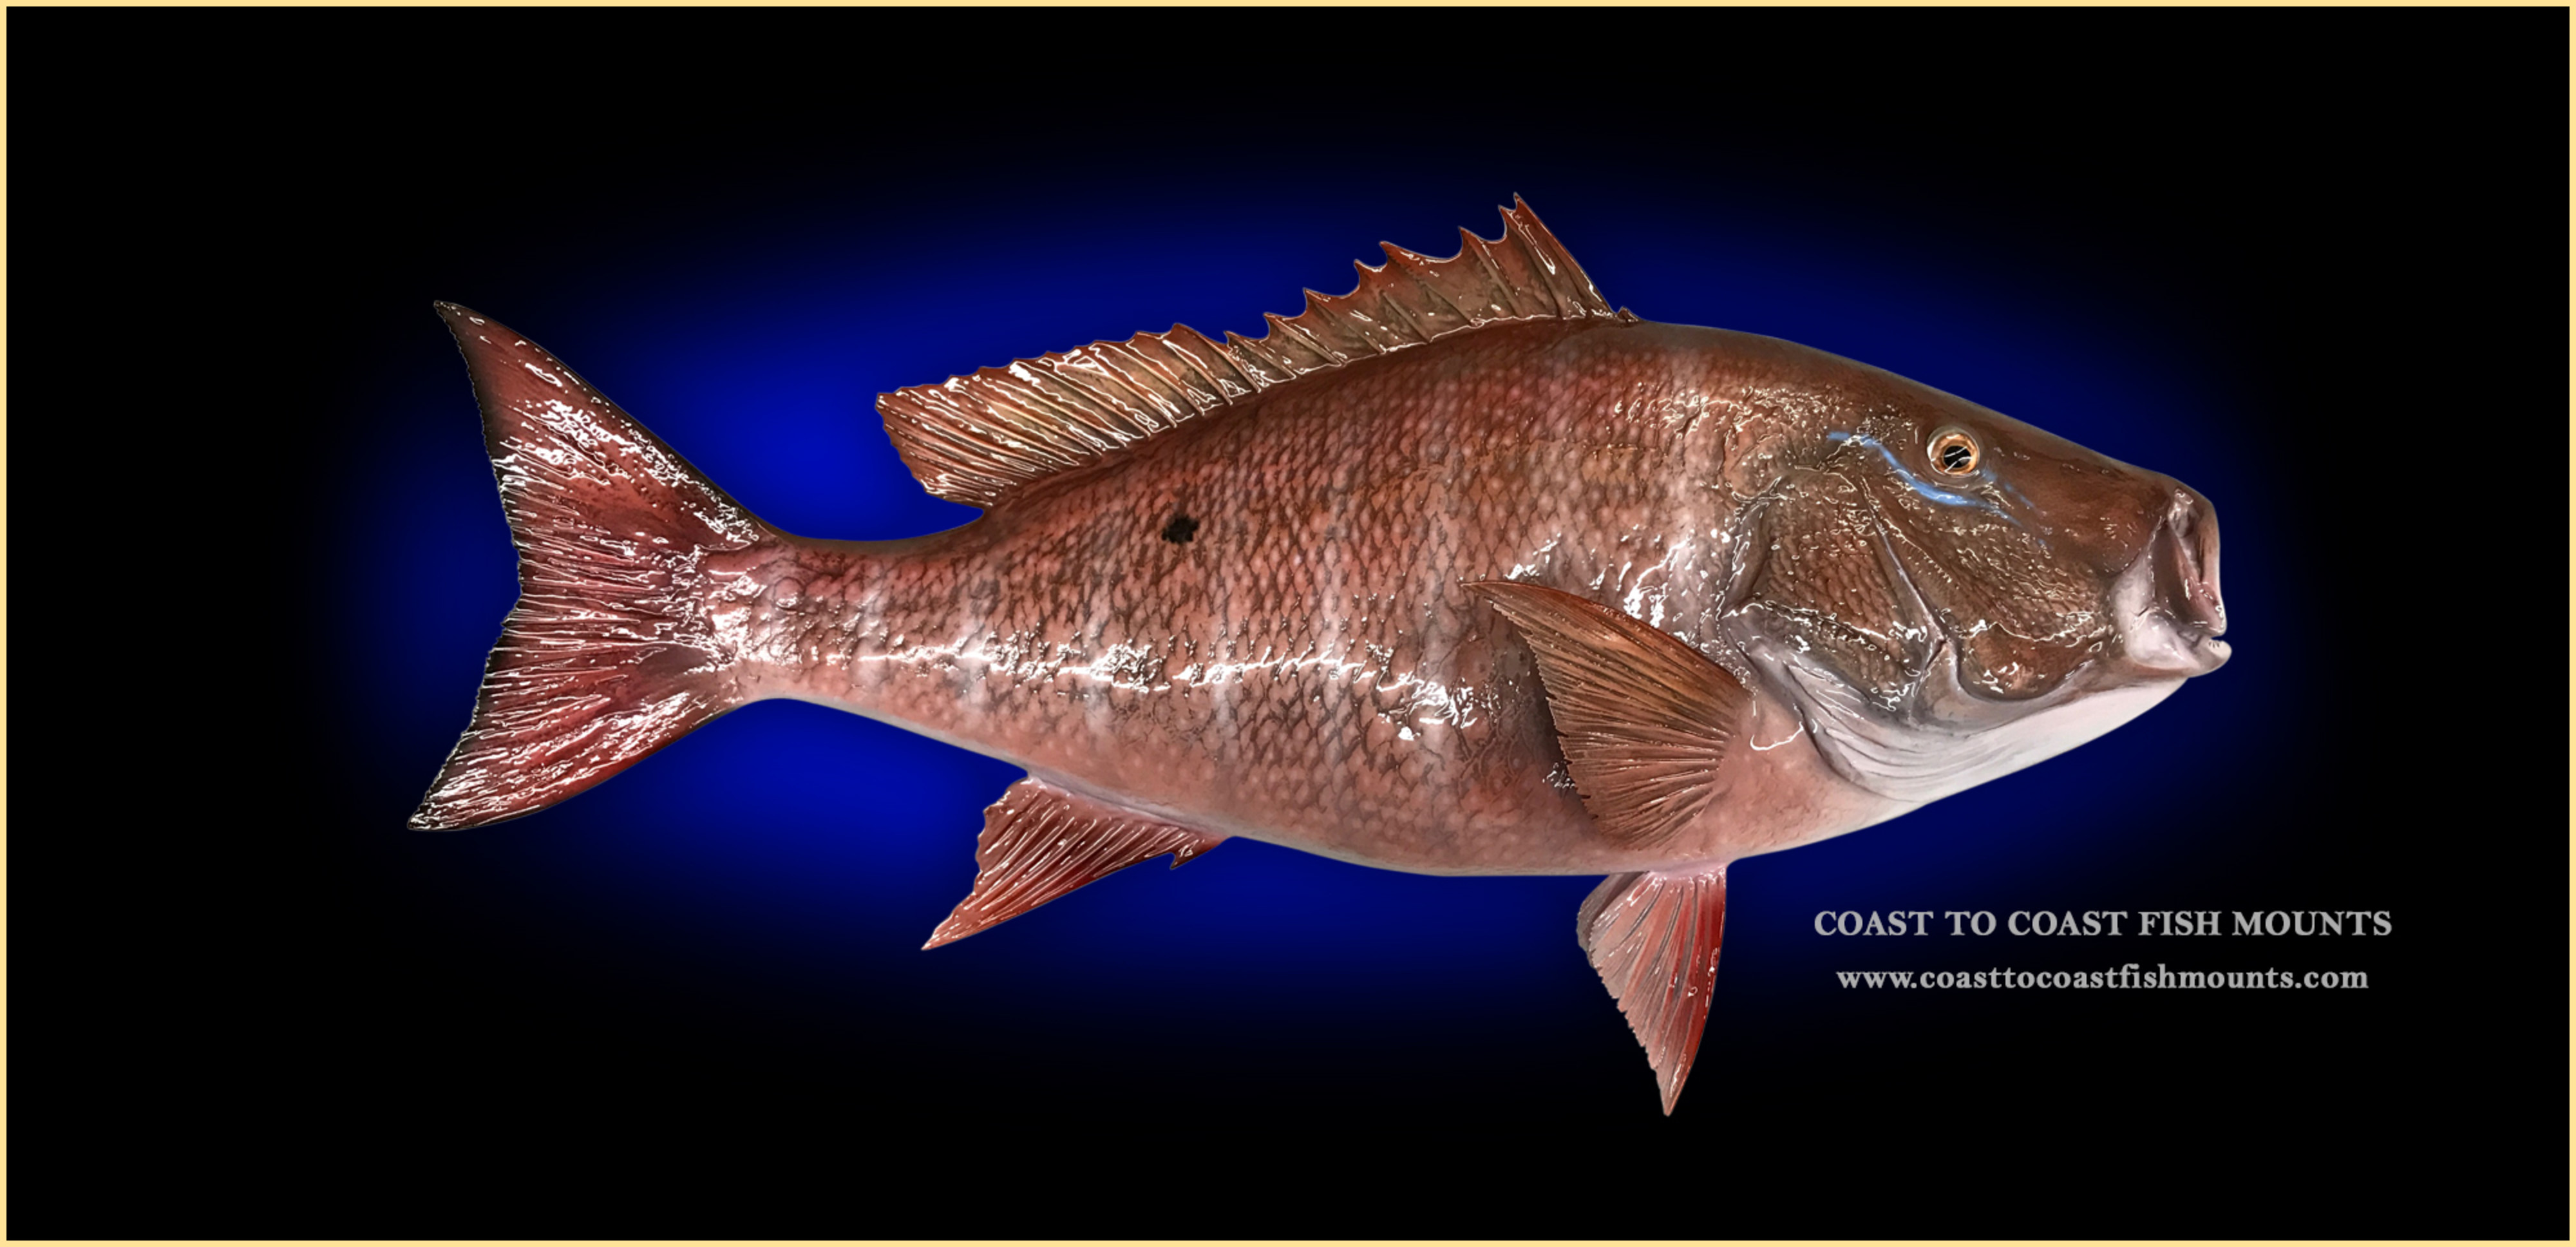 Mutton Snapper Fish Mounts & Replicas by Coast-to-Coast Fish Mounts